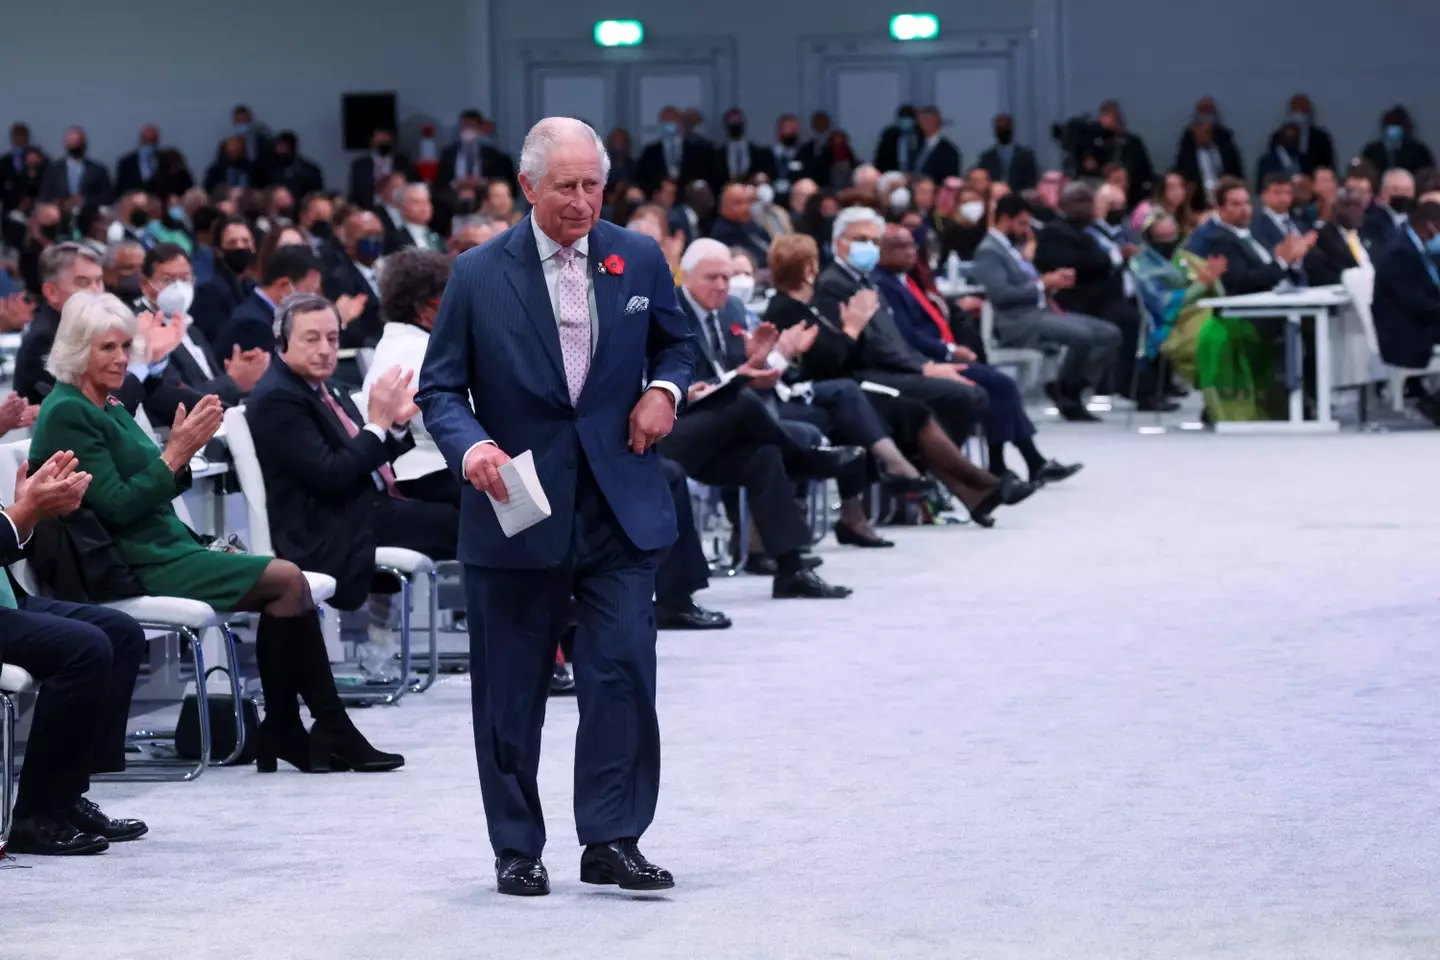 Prince Charles stumbled as he went to address world leaders (